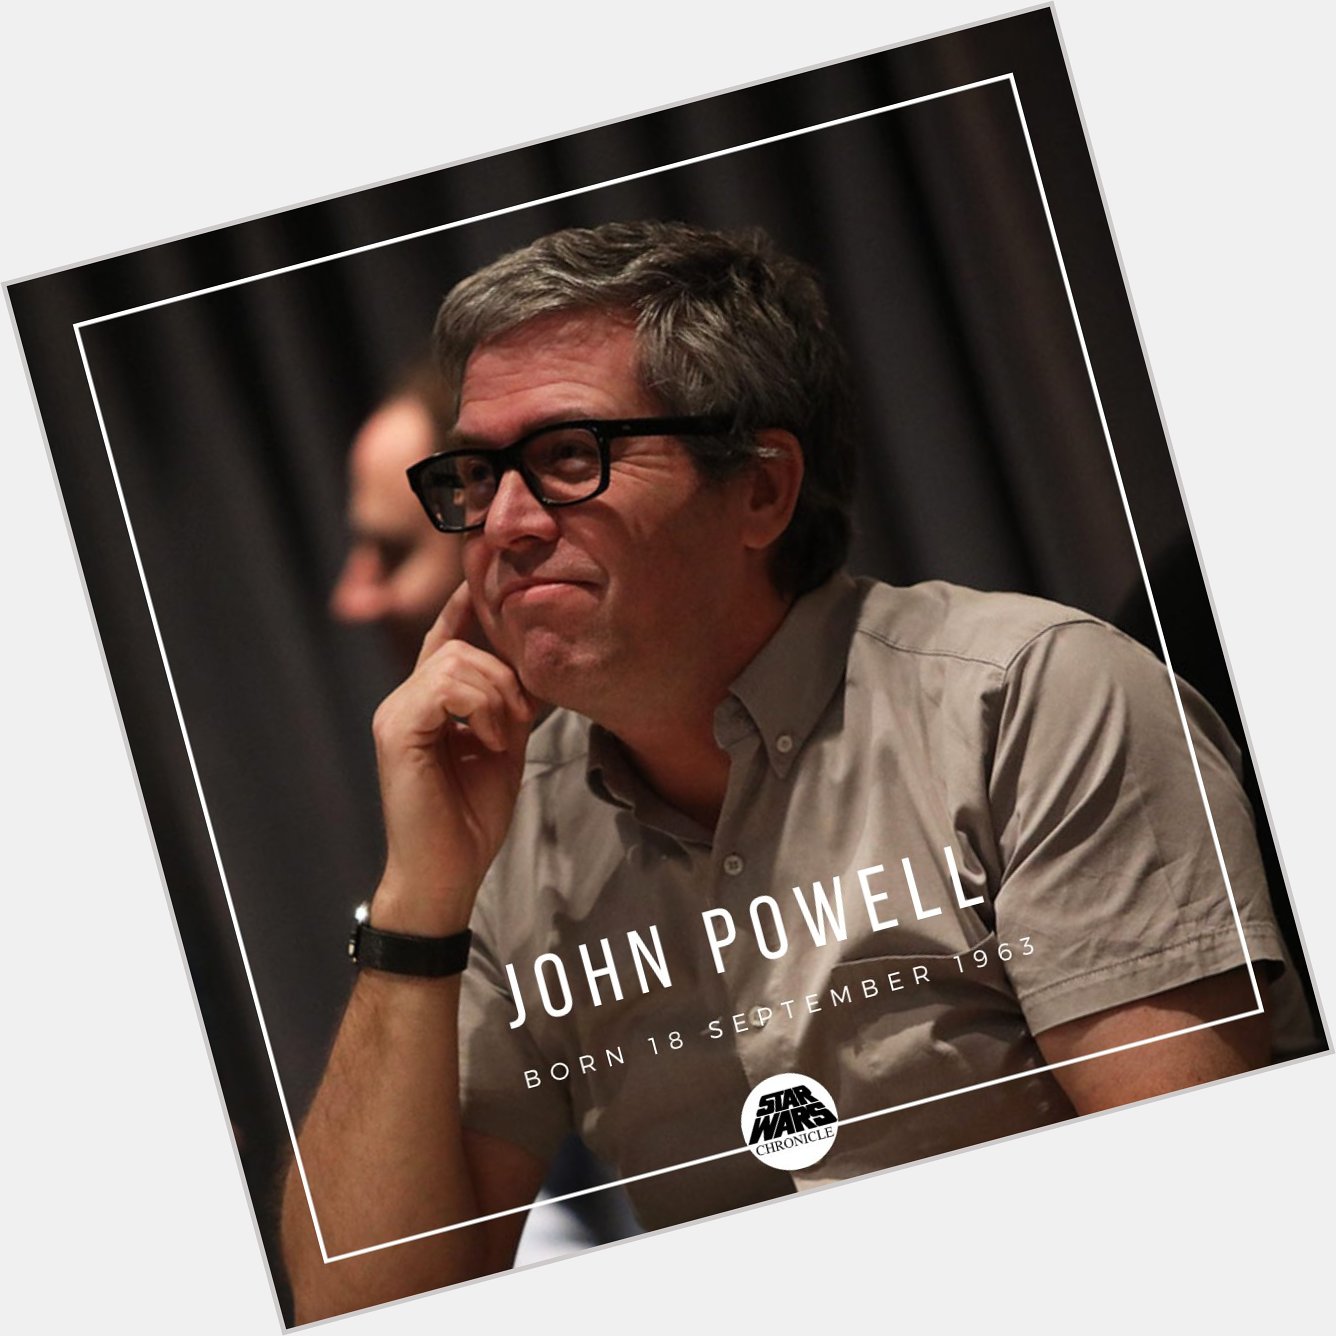 Happy birthday to John Powell, who composed Solo: A Star Wars Story! 